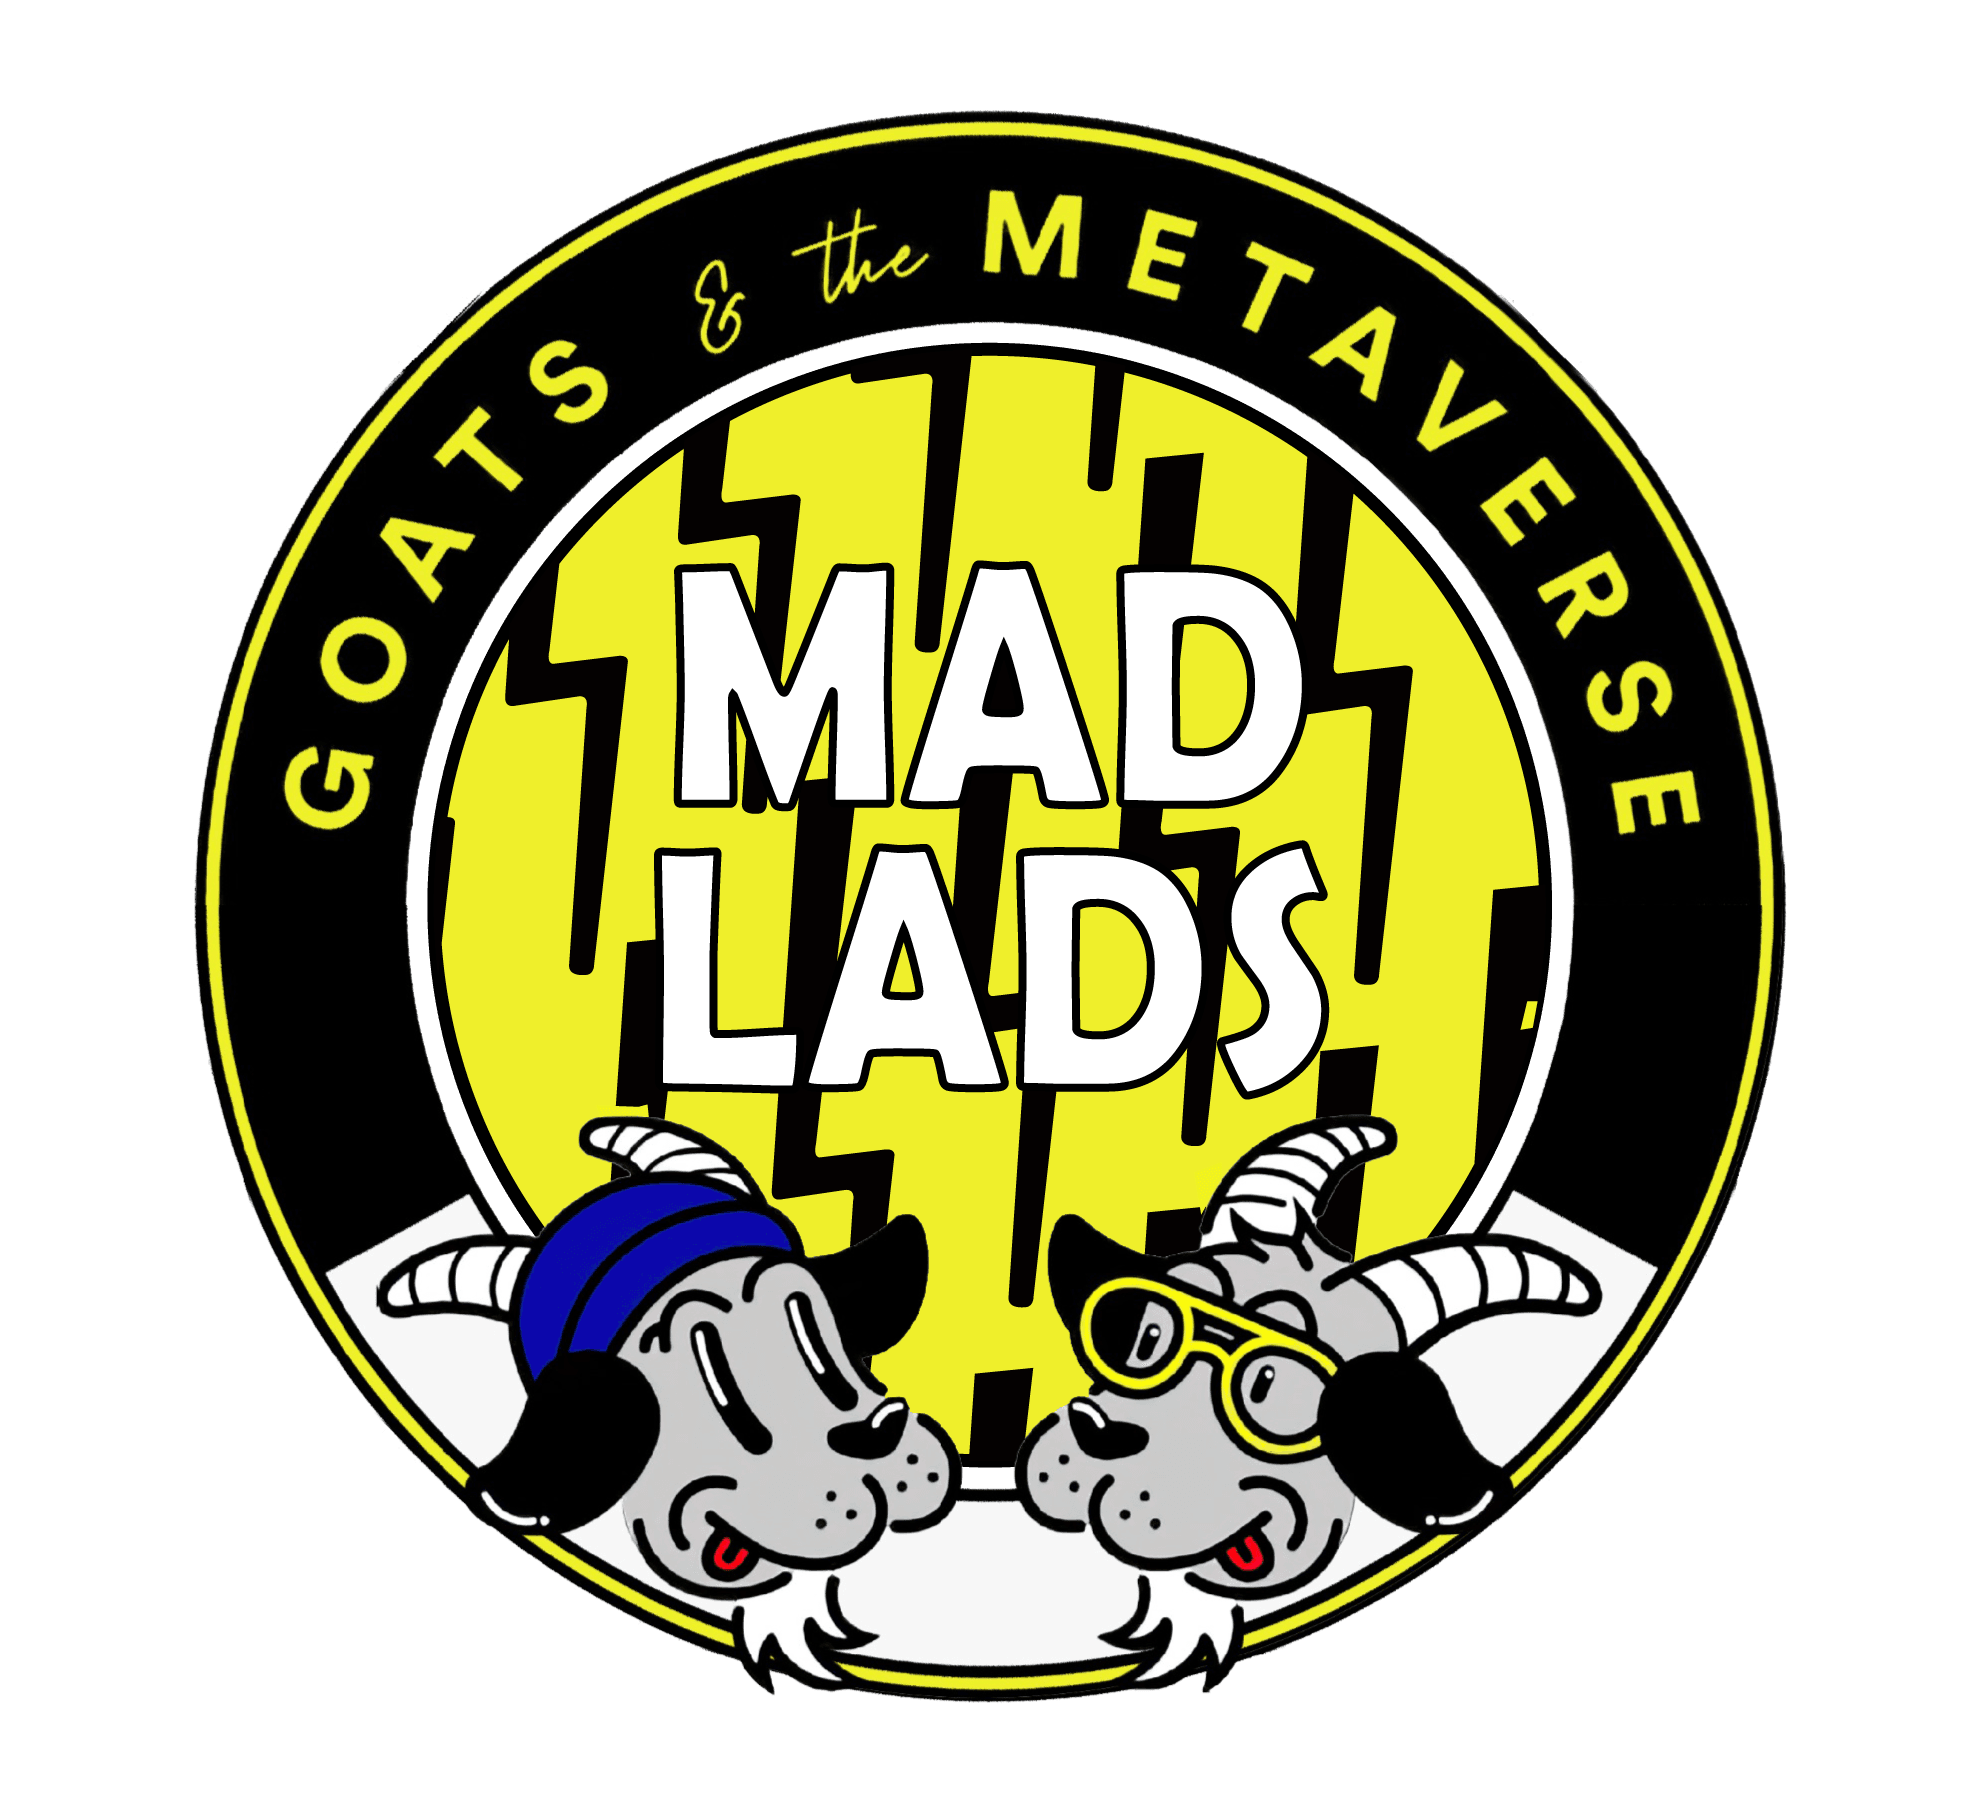 Goats and The Metaverse: Mad Lads Badge 12